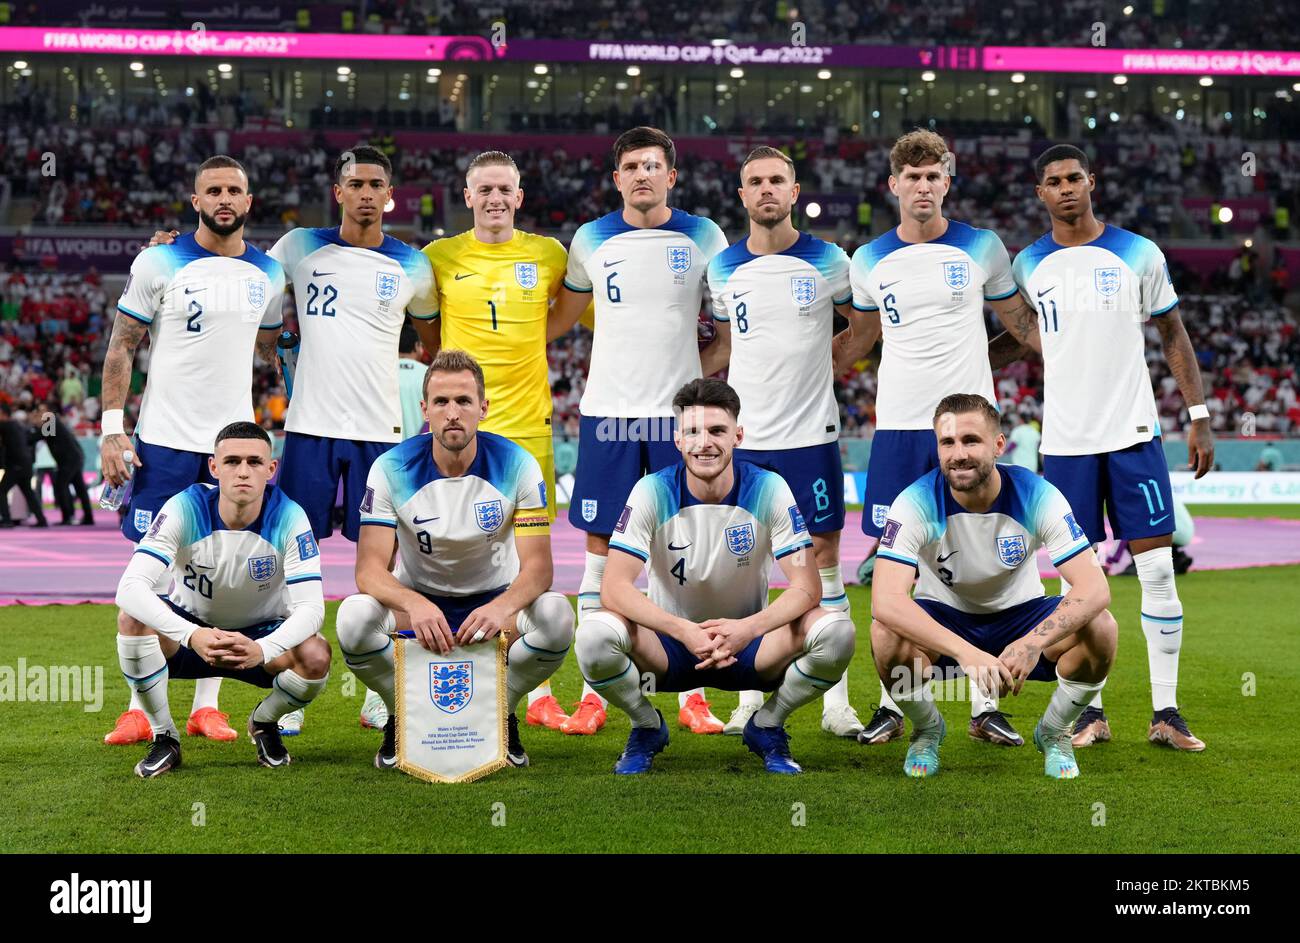 England's (left-right, back row) Kyle Walker, Jude Bellingham, Jordan Pickford, Harry Maguire, Jordan Henderson, John Stones, Marcus Rashford, (front row, left-right) Phil Foden, Harry Kane, Declan Rice and Luke Shaw line up for a team group ahead of the FIFA World Cup Group B match at the Ahmad Bin Ali Stadium, Al Rayyan, Qatar. Picture date: Tuesday November 29, 2022. Stock Photo